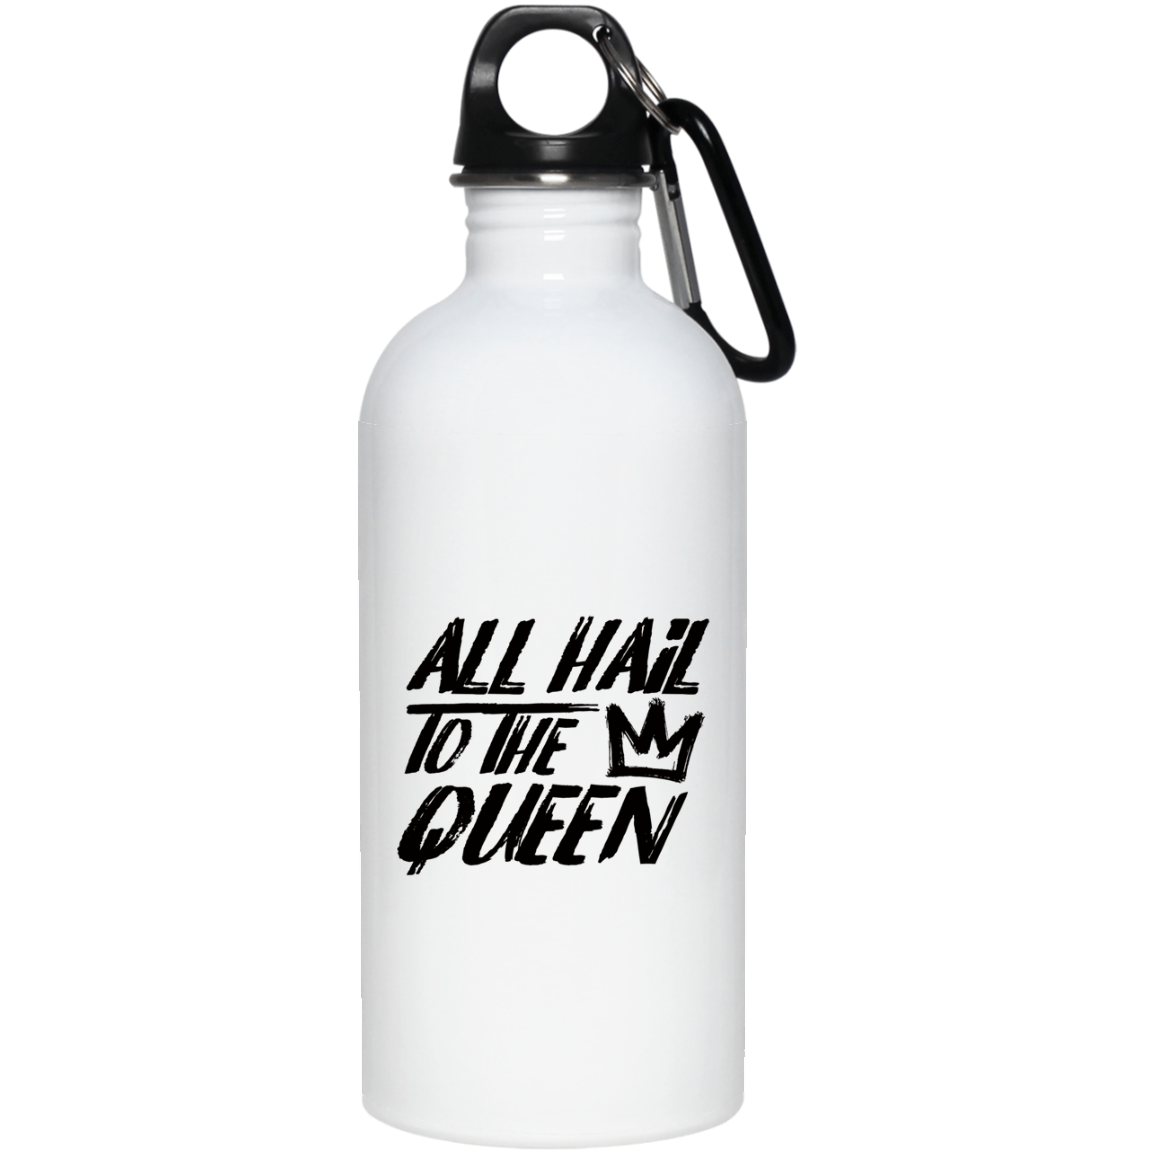 ALL HAIL TO THE QUEEN STAINLESS STEEL 20 OZ WATER BOTTLE